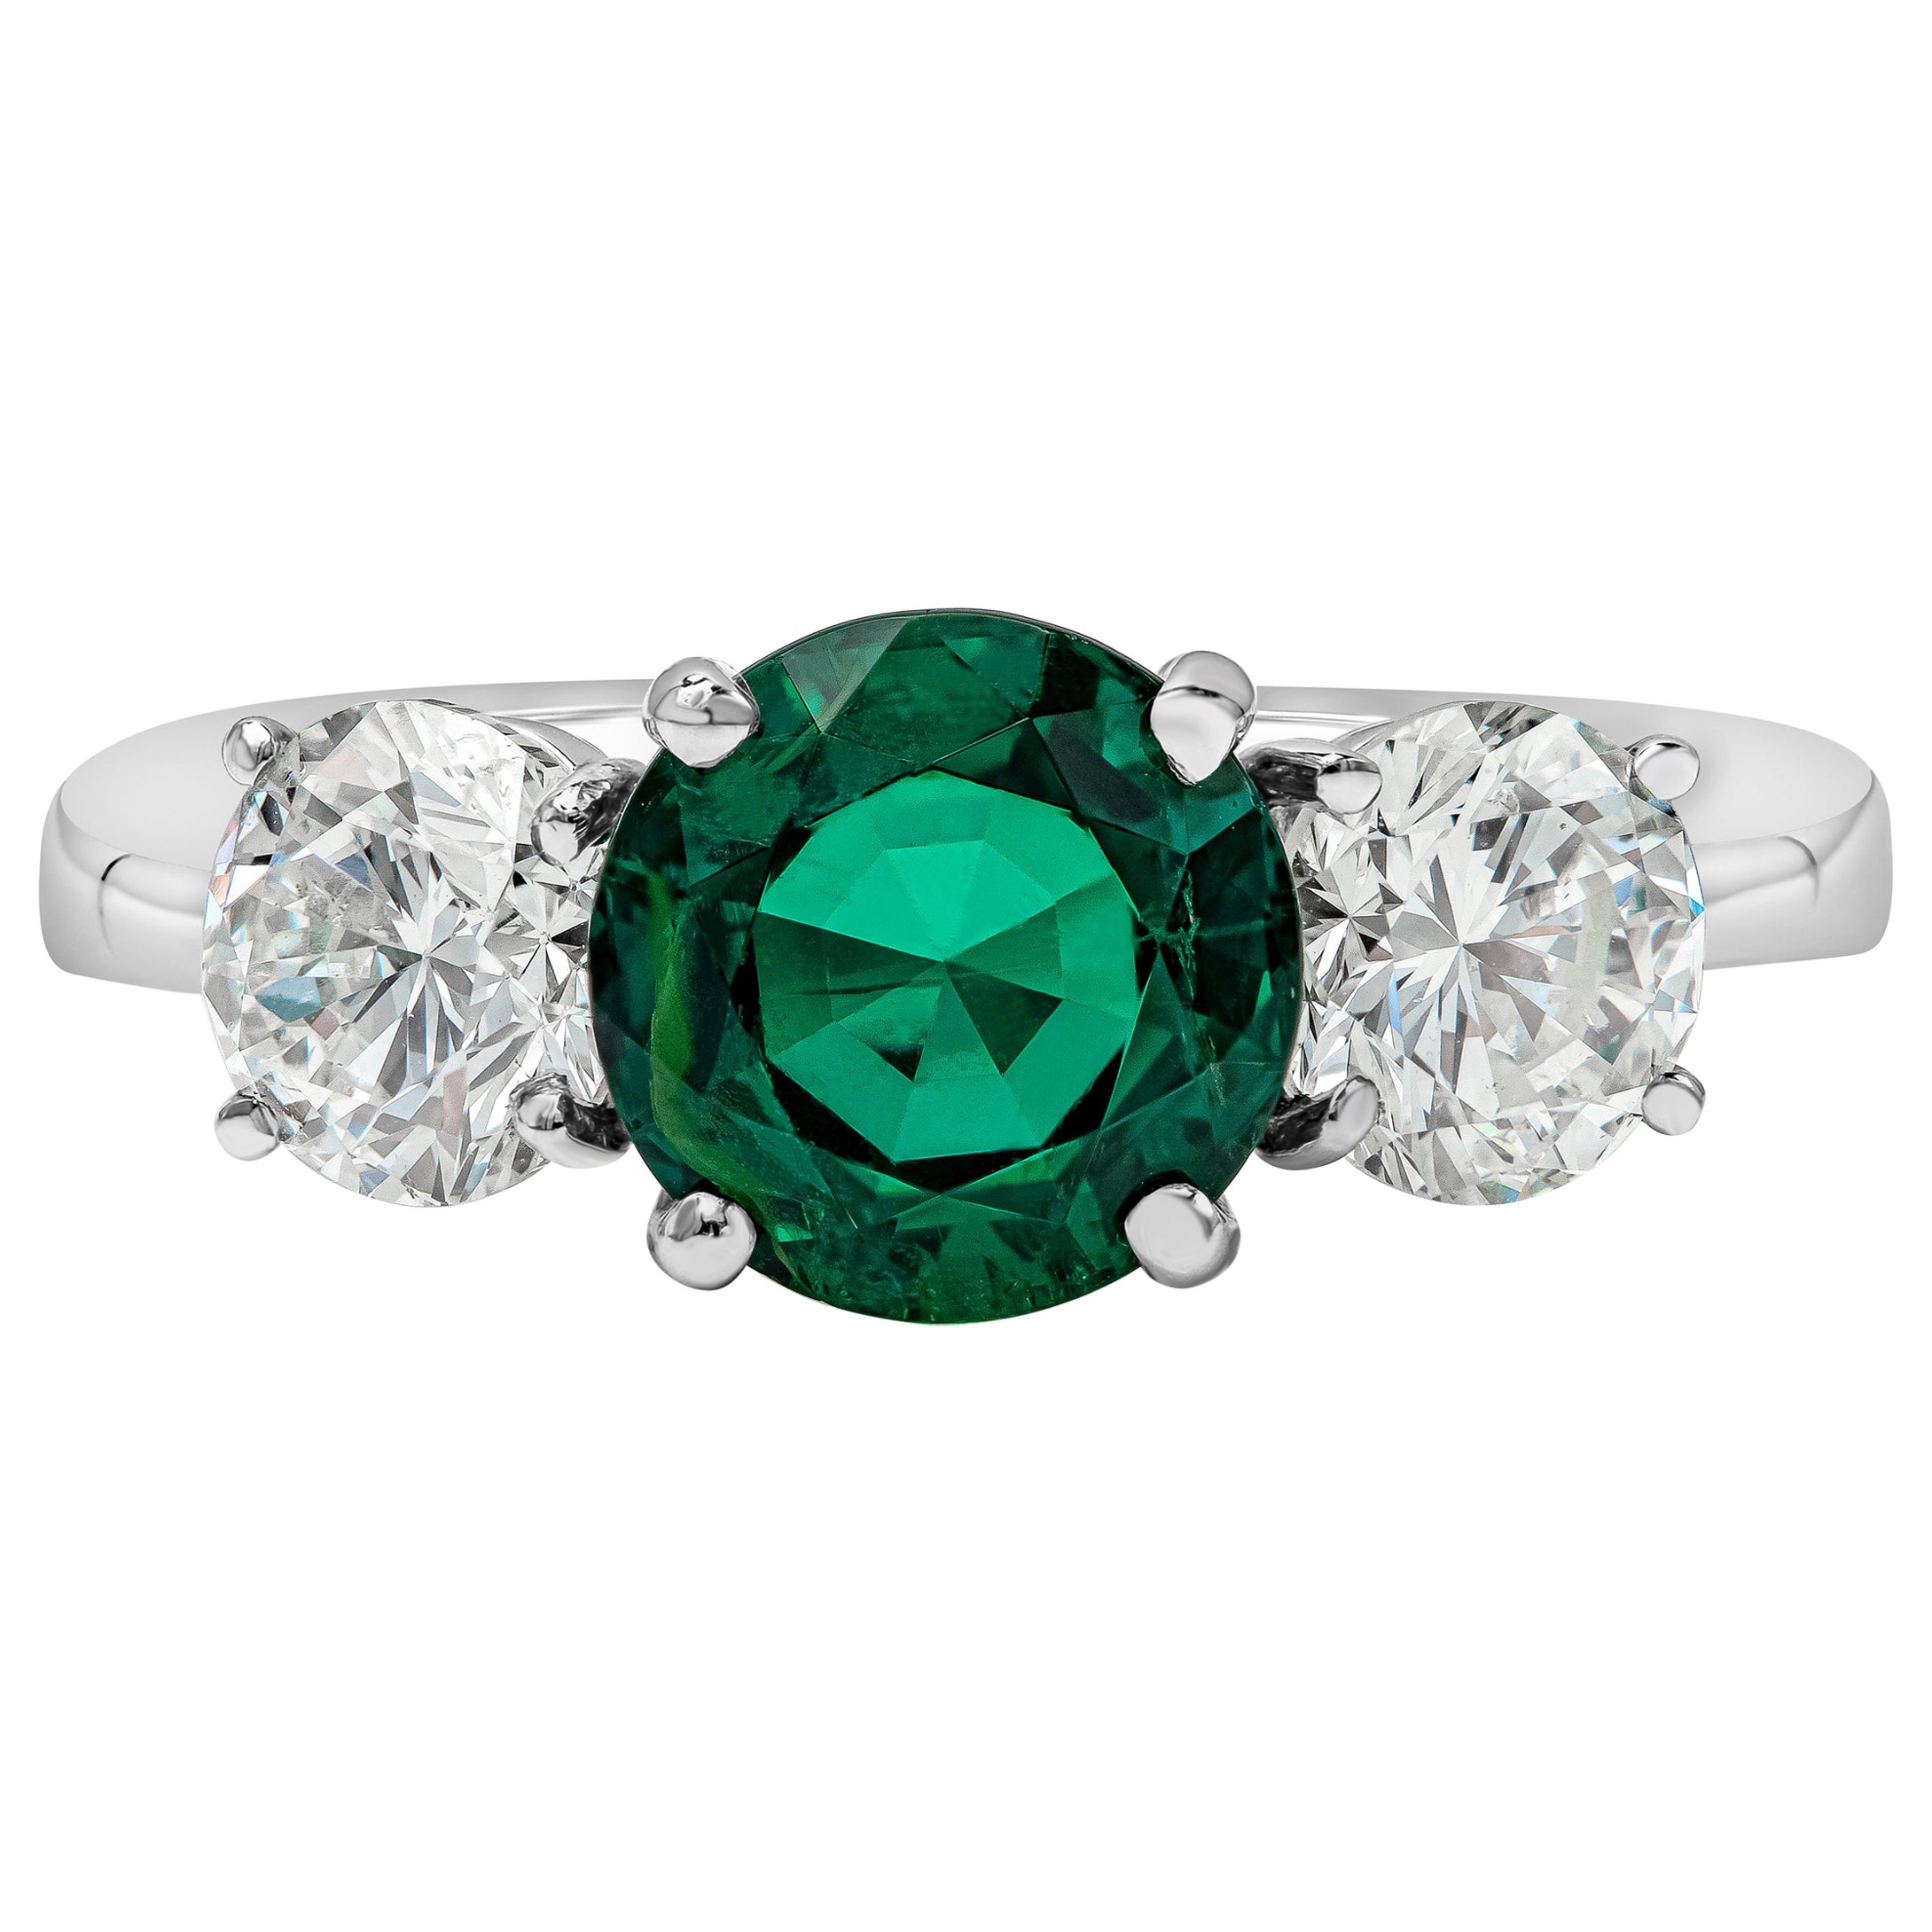 1.87 Carat Round Cut Rare Russian Green Emerald and Diamond Engagement Ring For Sale